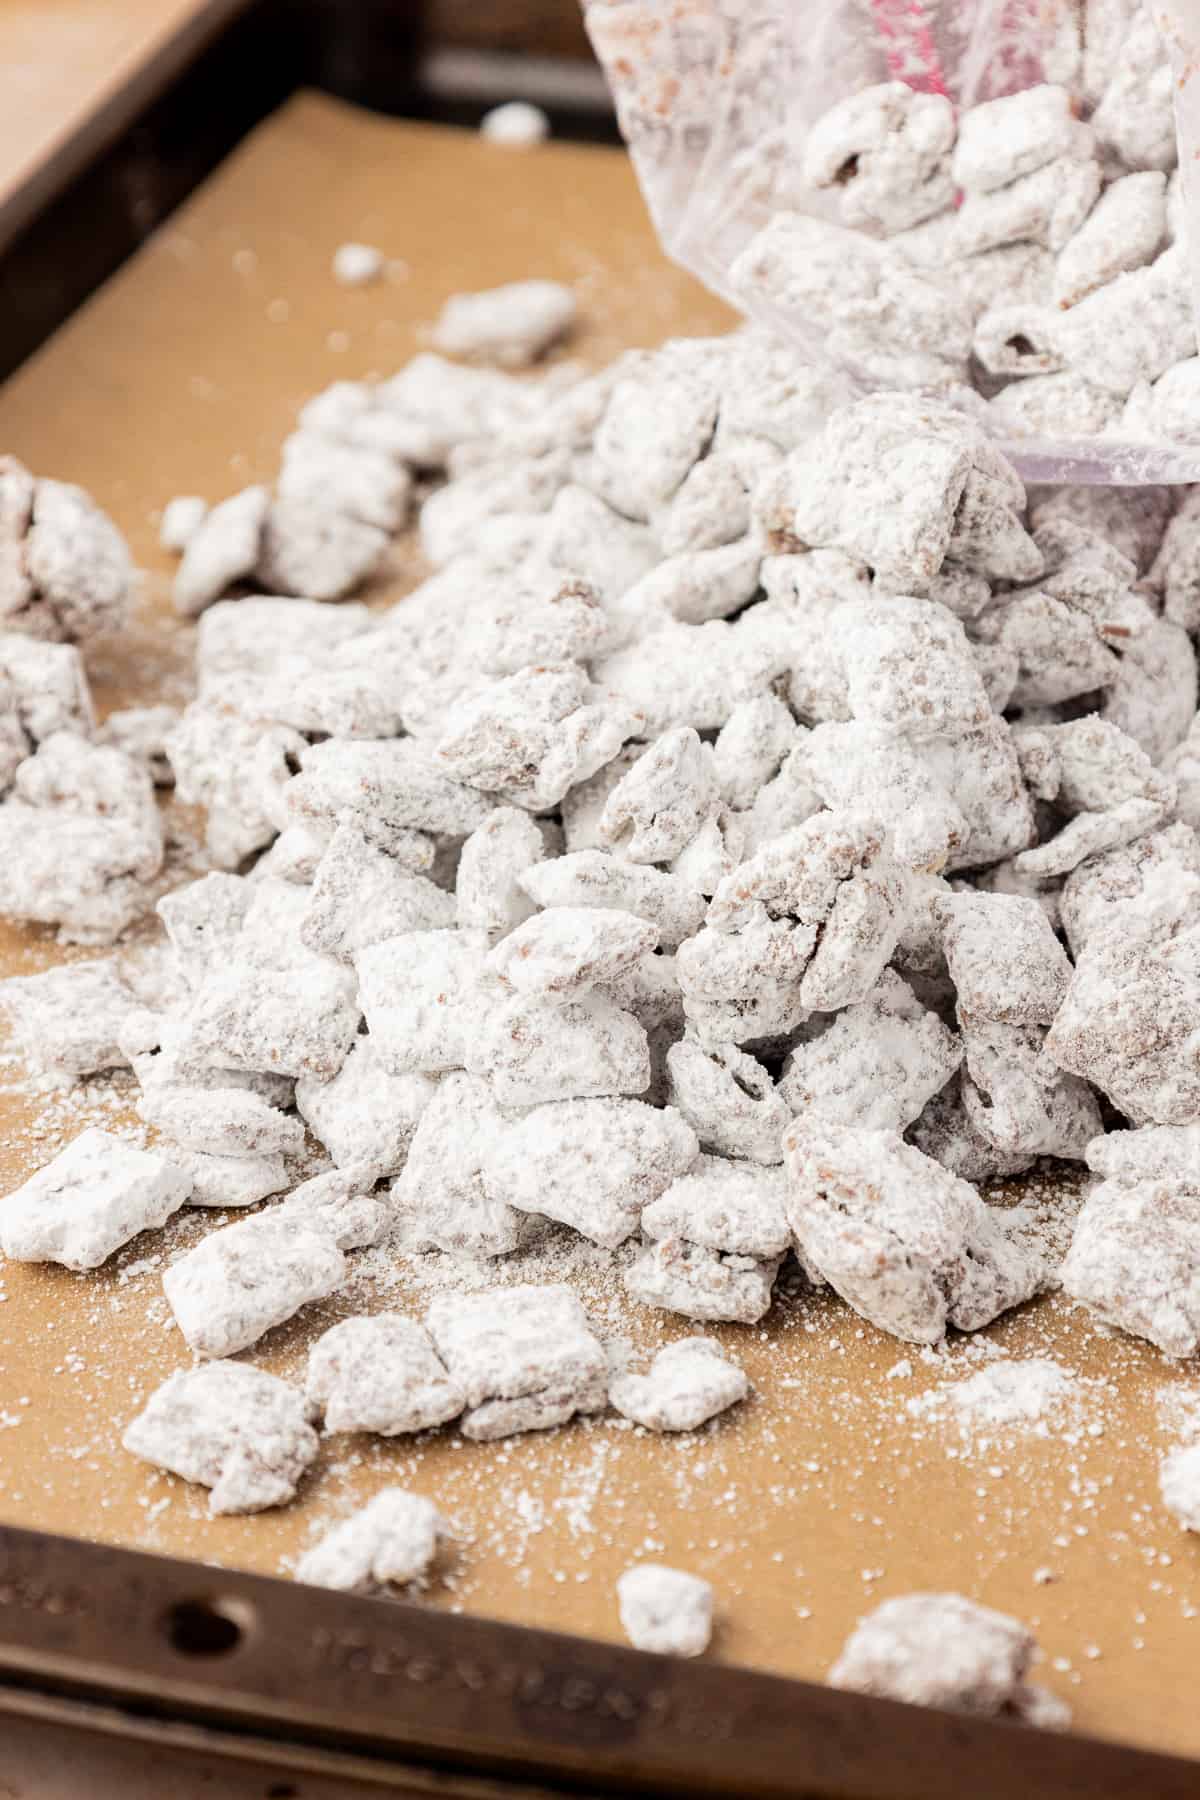 A pile of puppy chow spilled out of a ziploc bag onto a sheet pan lined with parchment paper